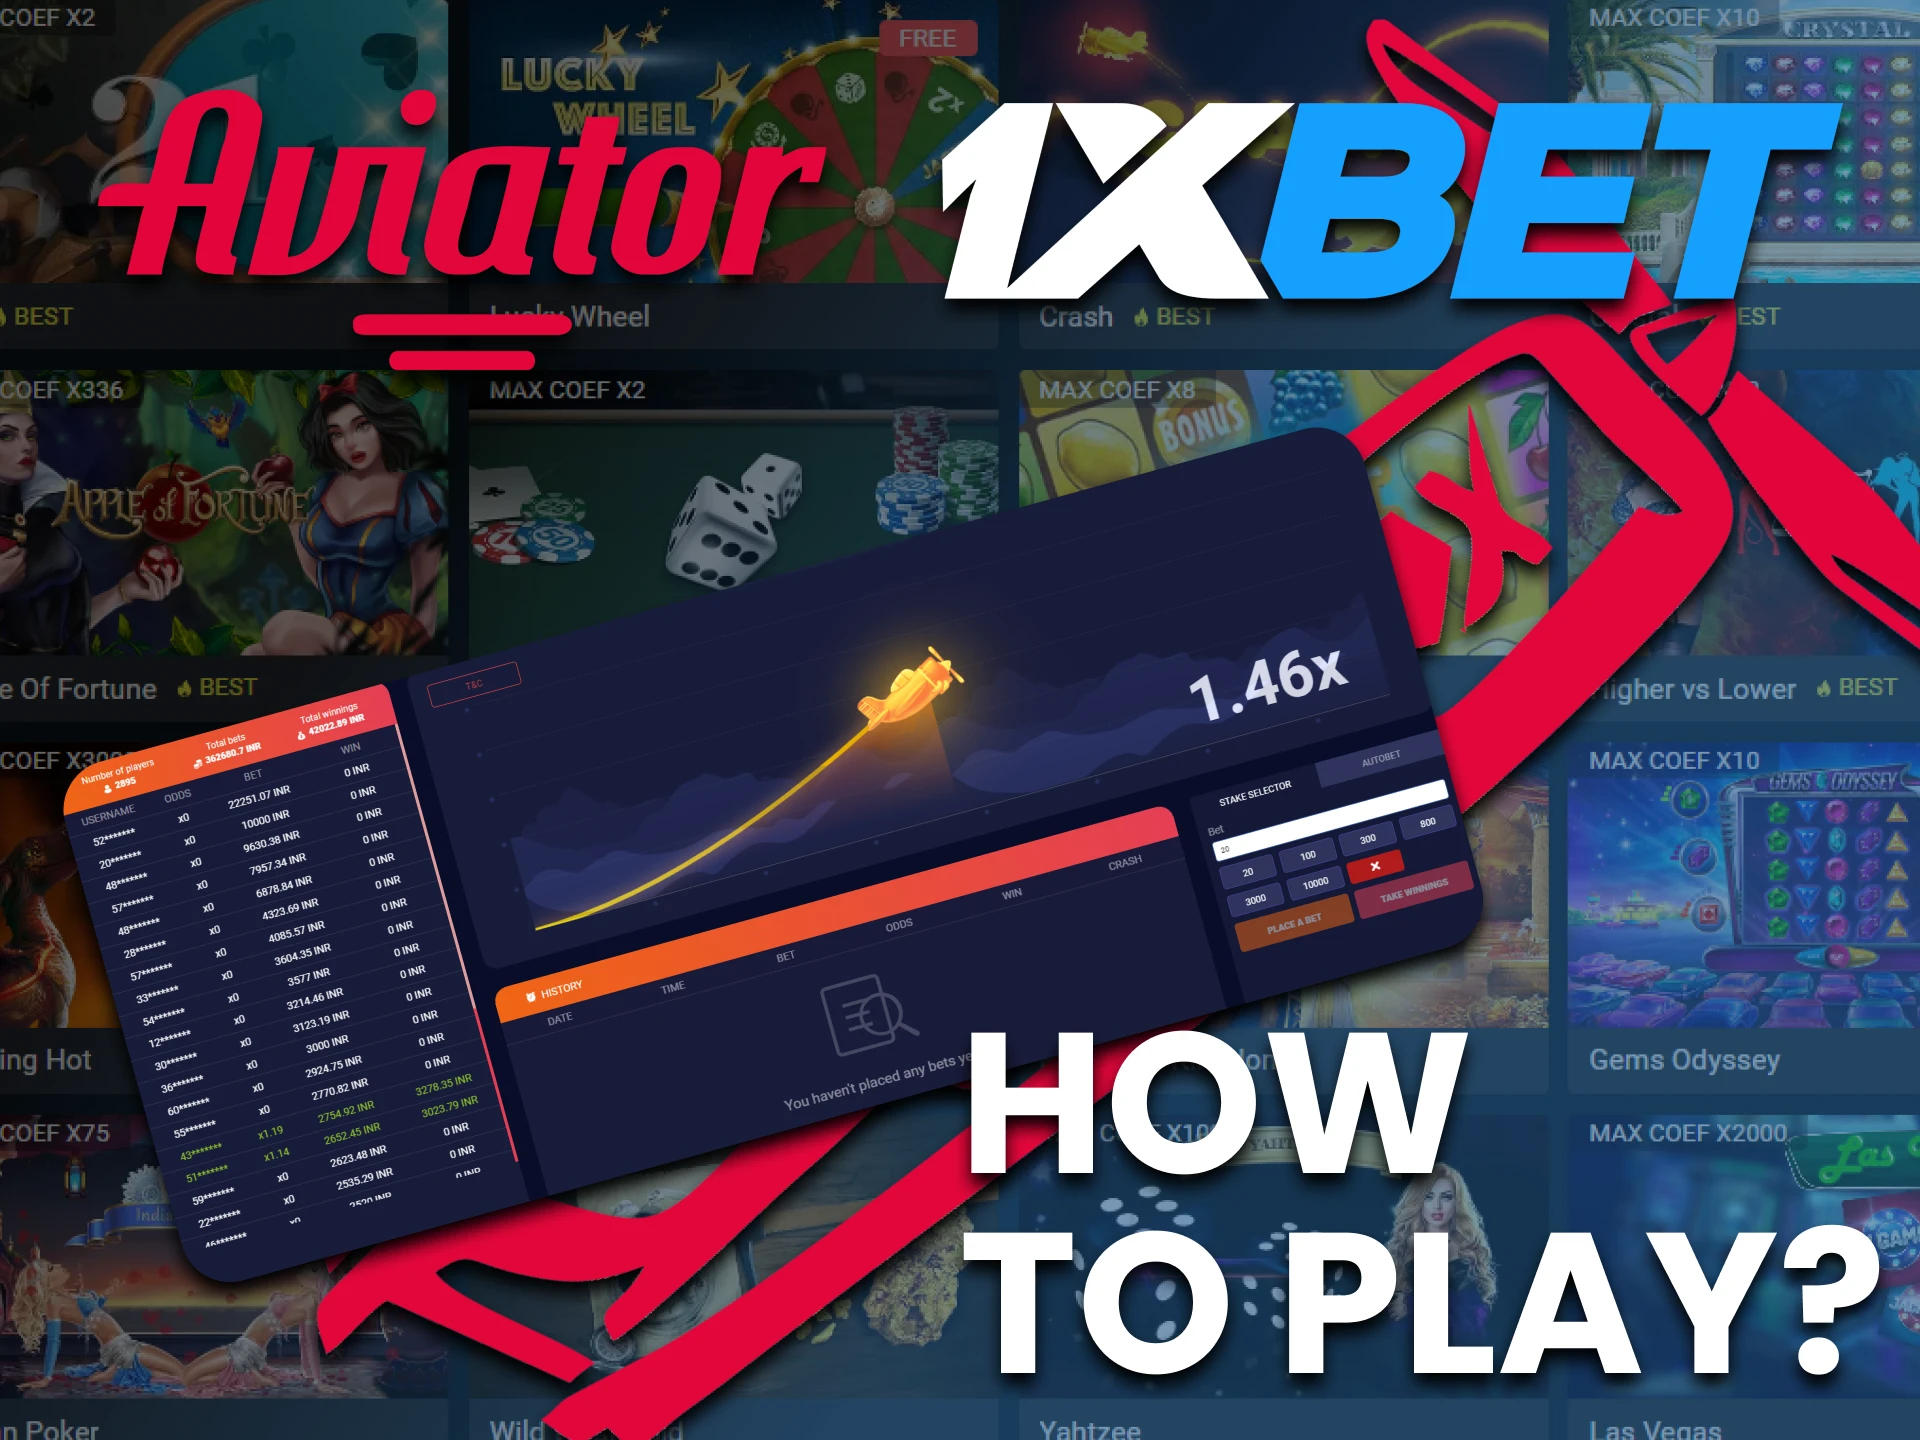 Launch the 1xbet website, find the game and start playing.